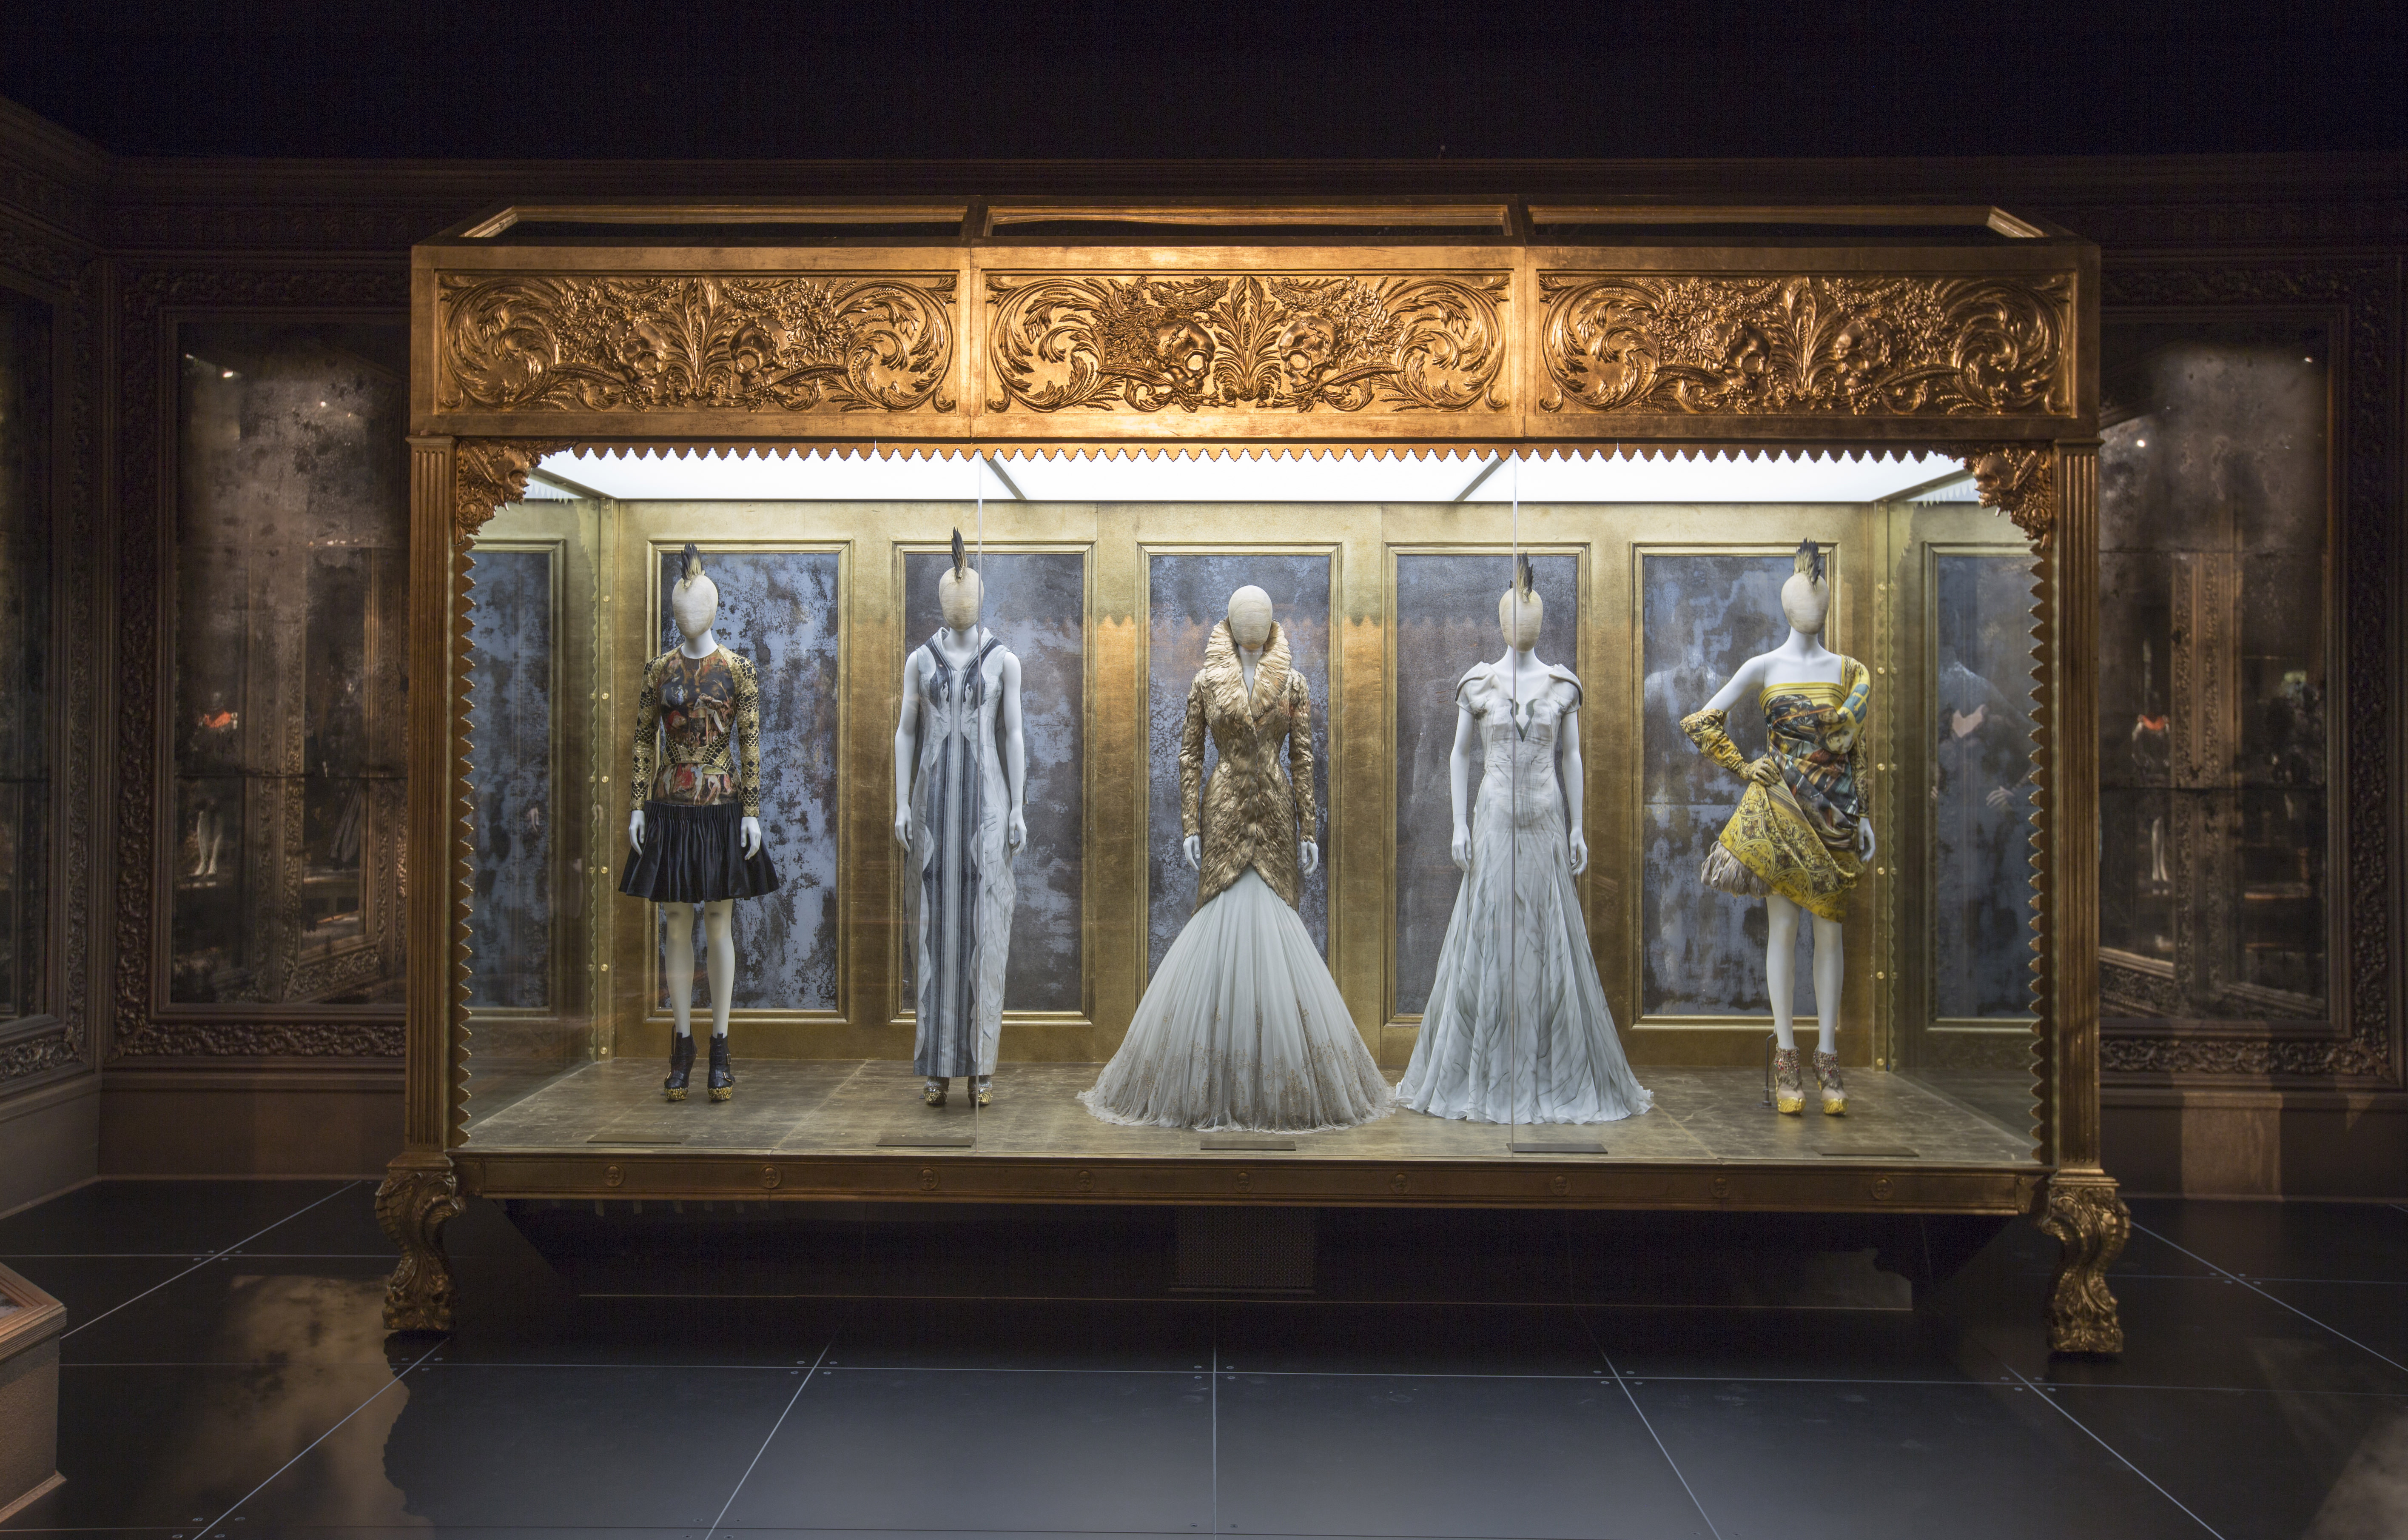 3._Installation_view_of_Romantic_Gothic_gallery_Alexander_McQueen_Savage_Beauty_at_the_VA_c_Victoria_and_Albert_Museum_London